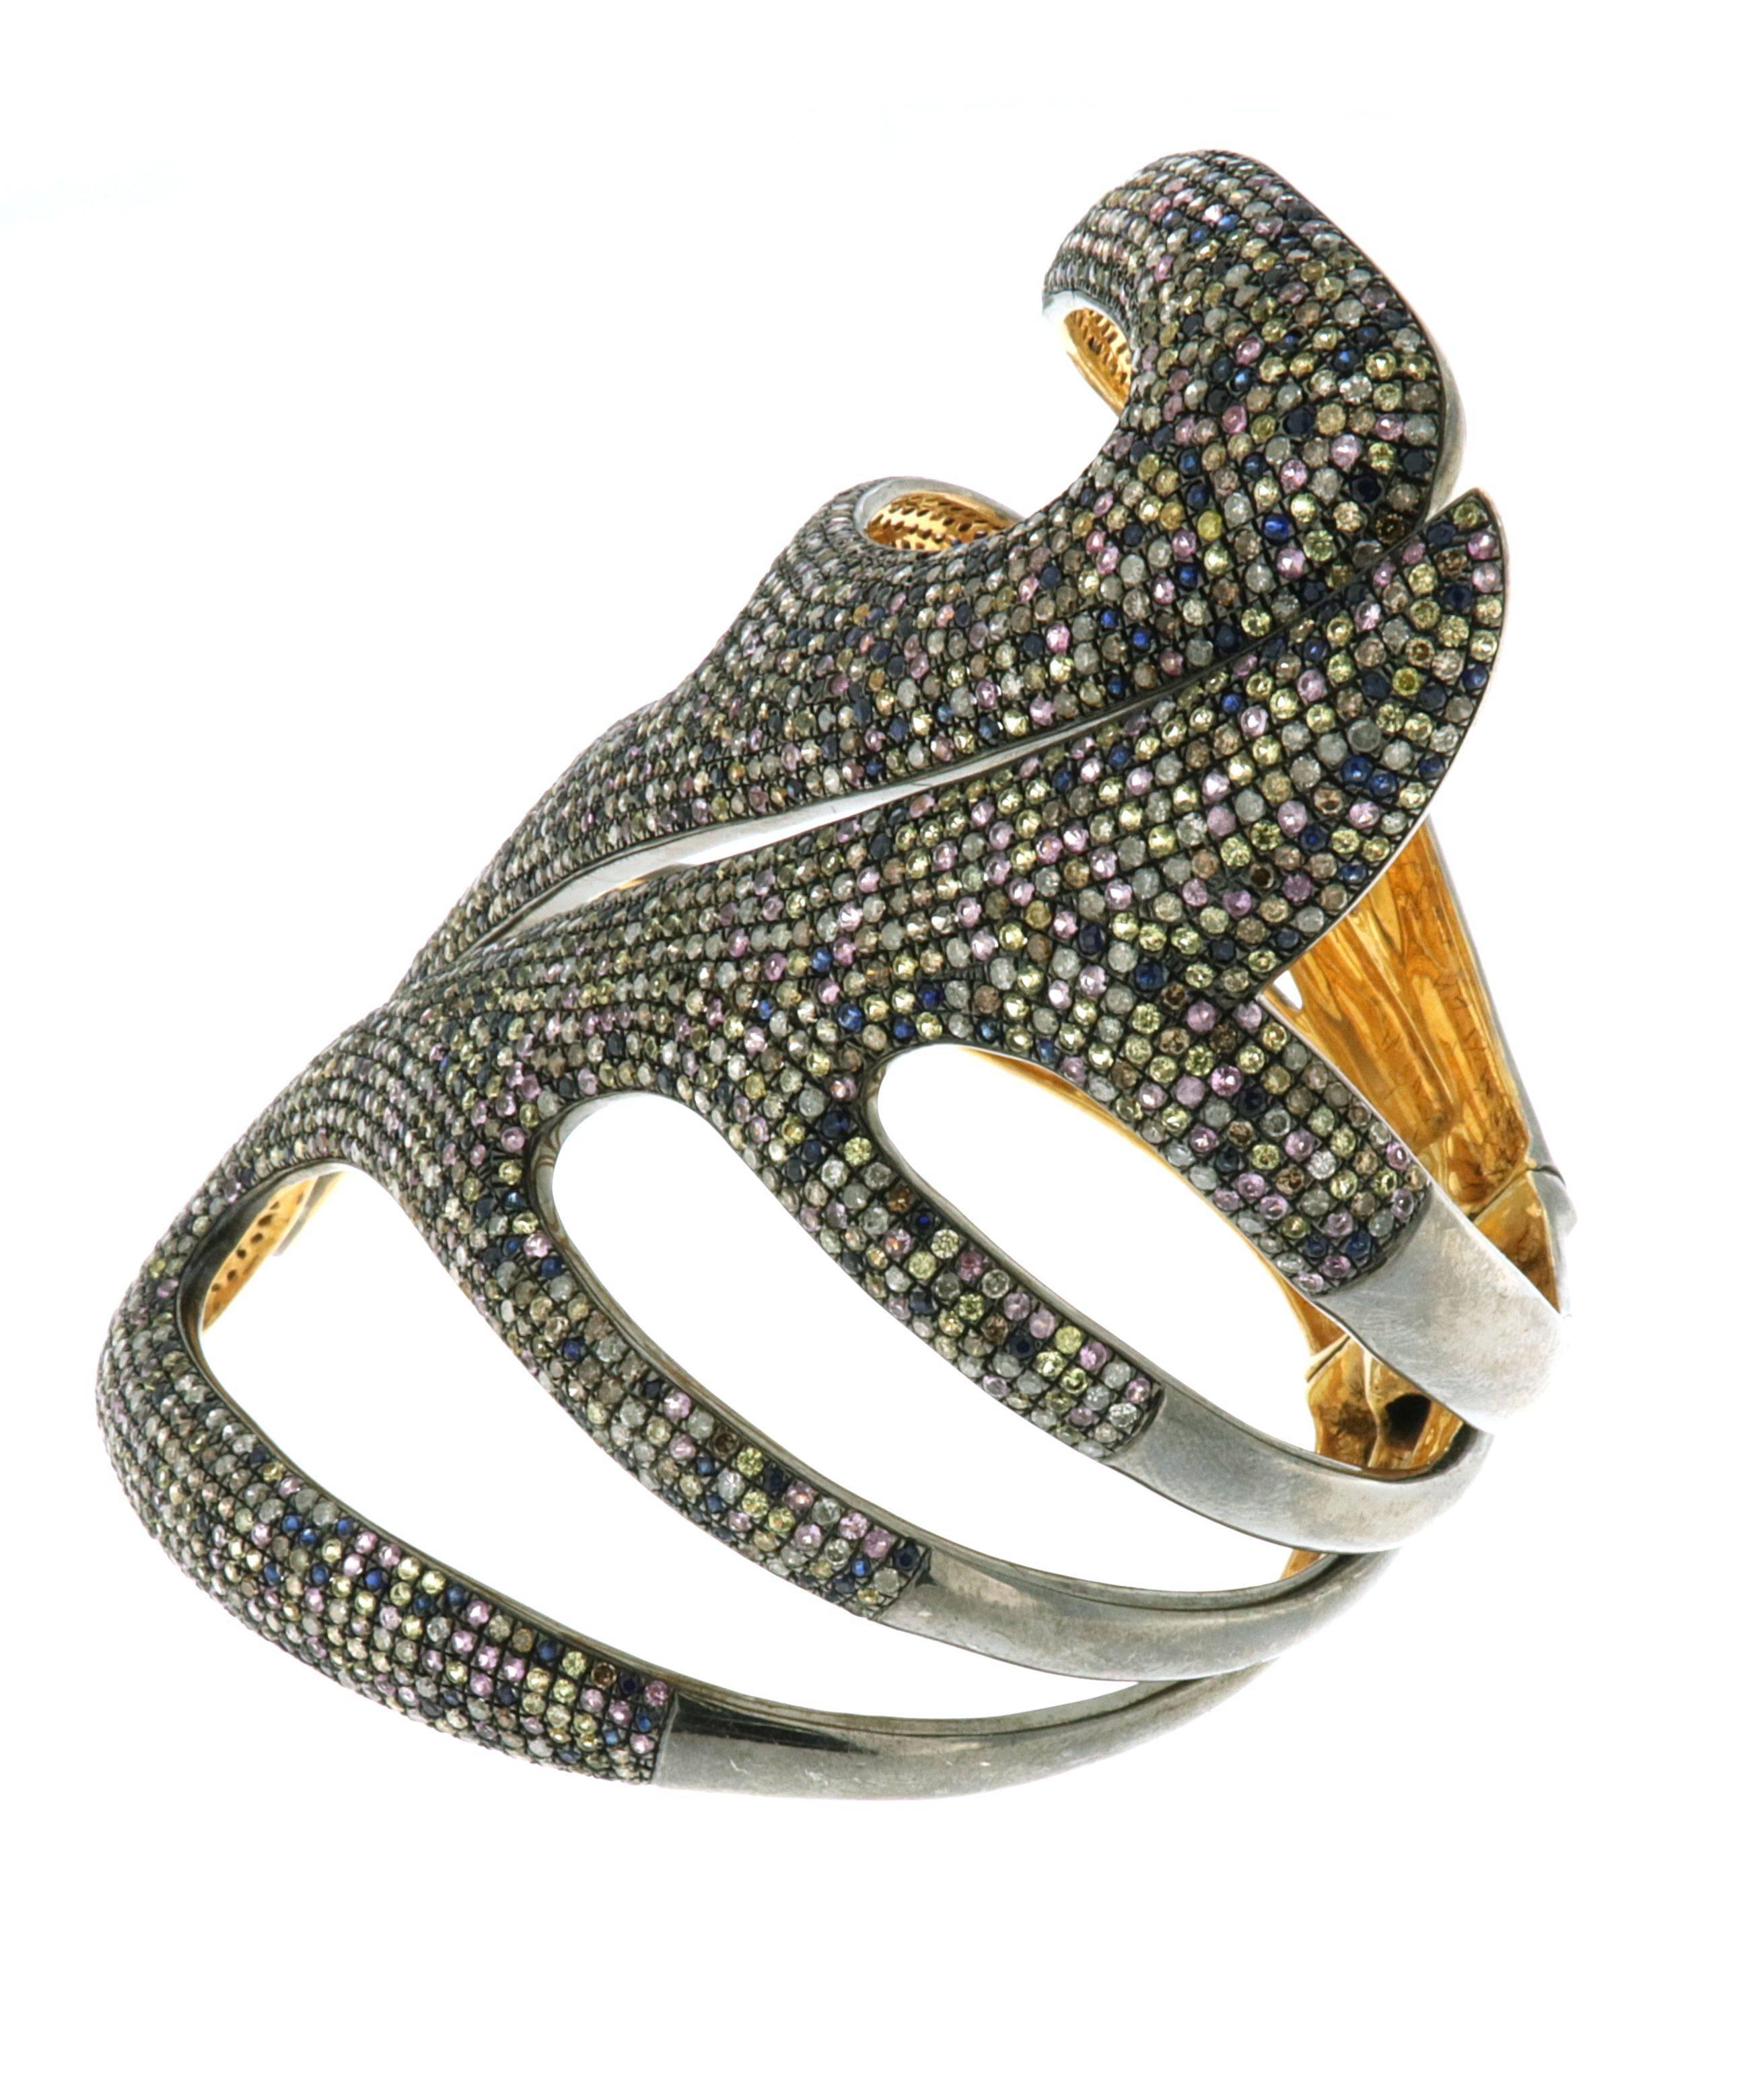 This splendid Multicolor Sapphire and Diamond Cuff is 3.85 inch long on wrist  and opens up on top to wear. 

18kt:0.6gms
Diamond:11.16cts
Slv:80.59gms
Sapphire:15.10cts